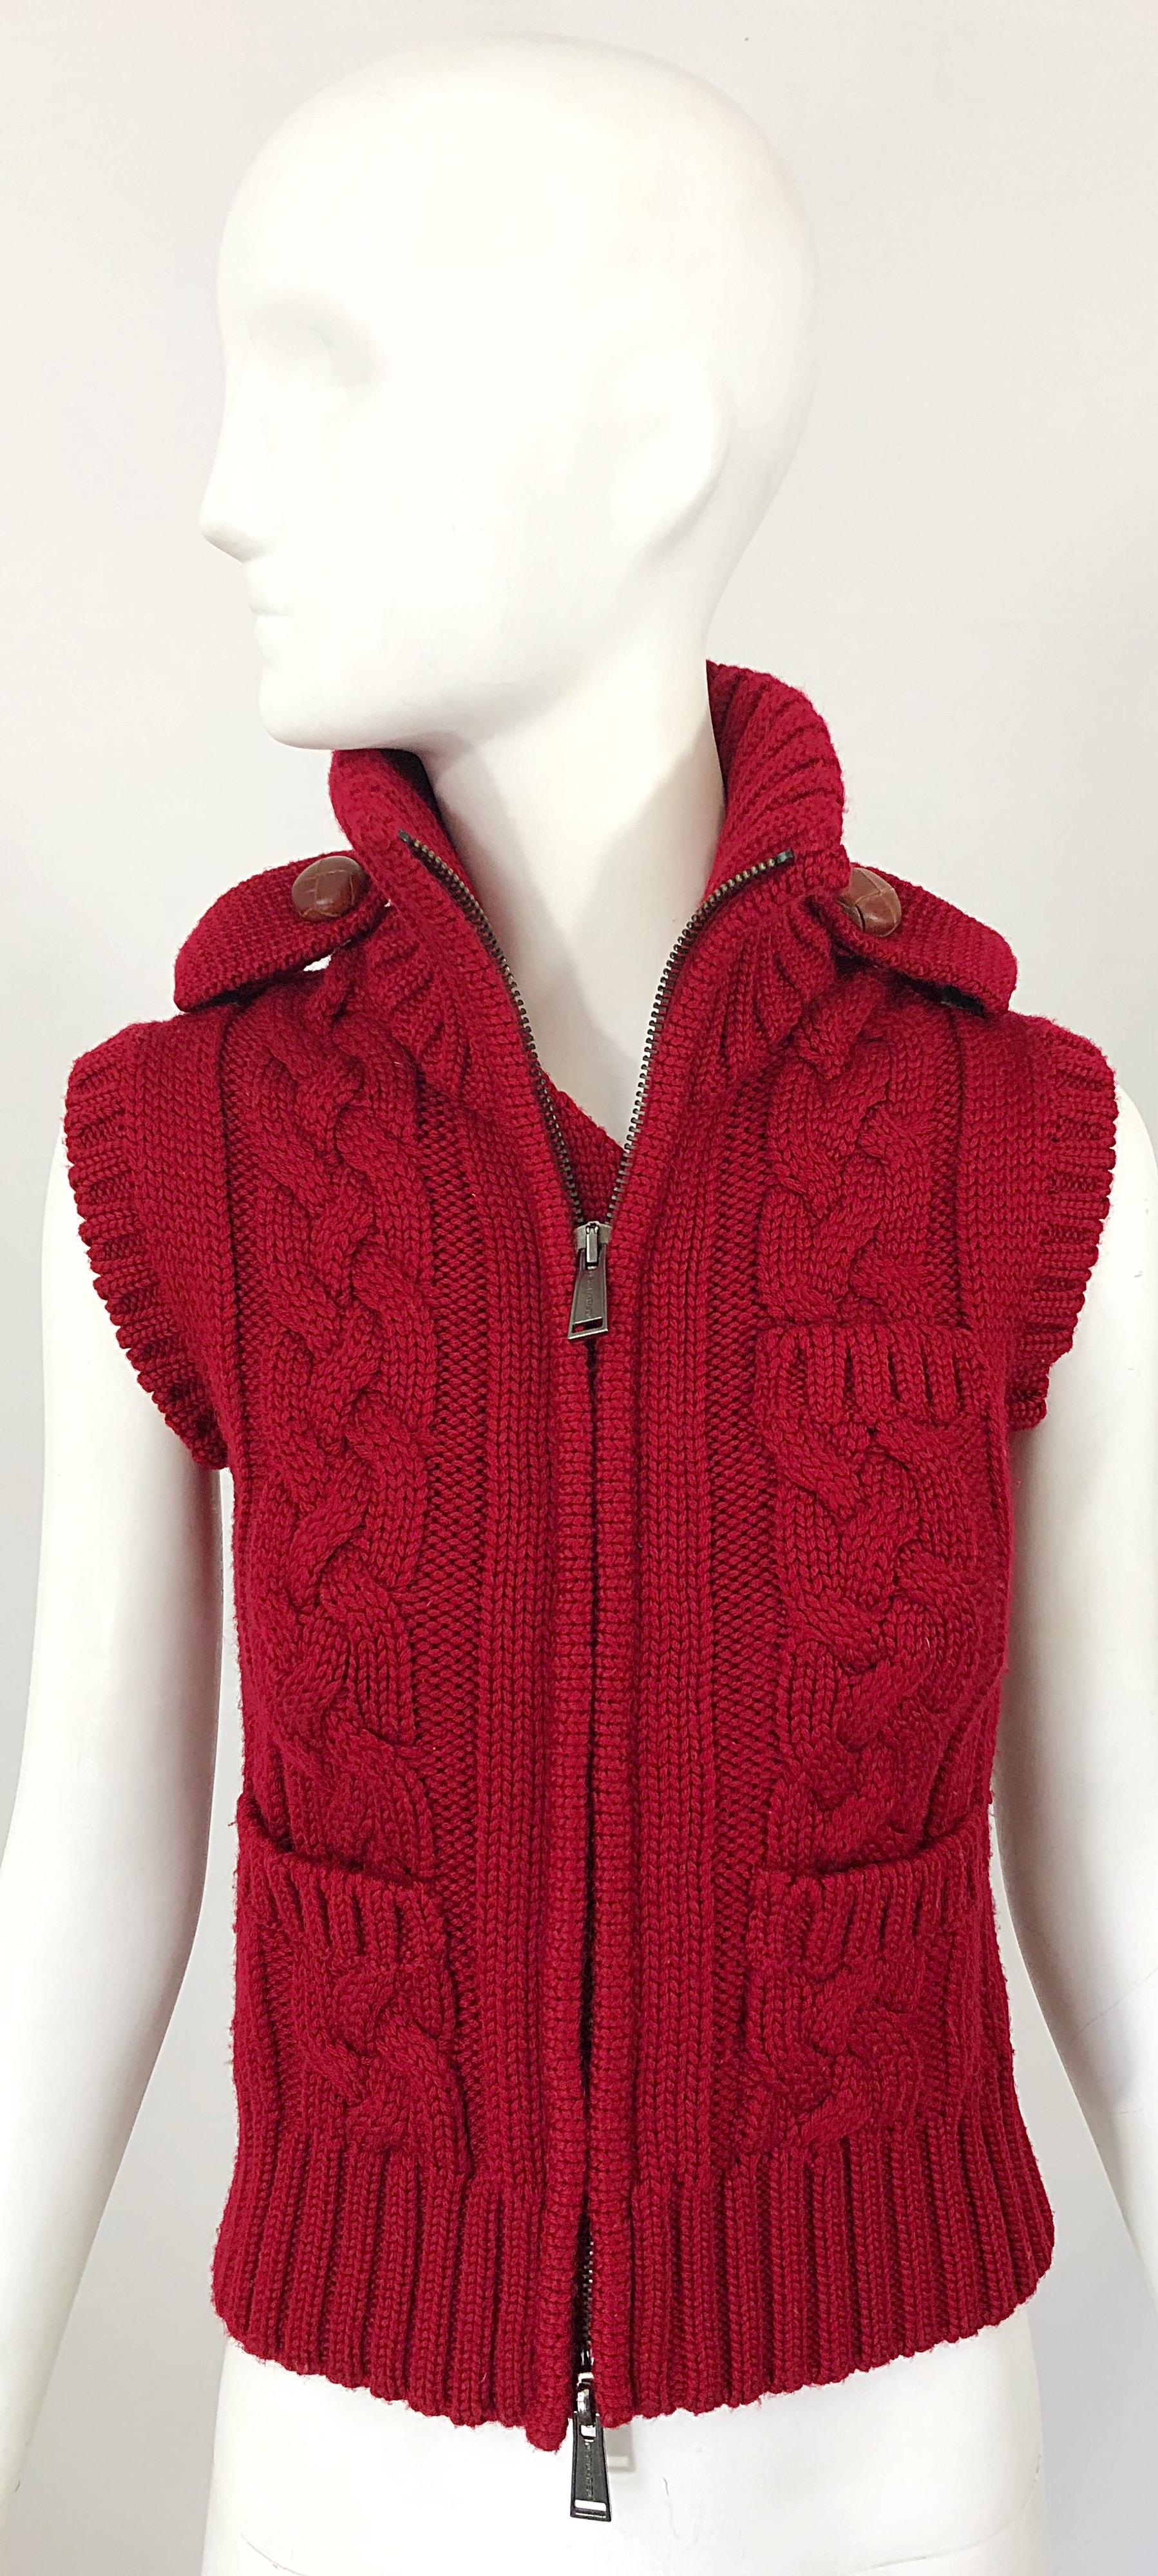 DSquared2 Early 2000s Lipstick Red Wool Sleeveless Cardigan Sweater Vest Top For Sale 7